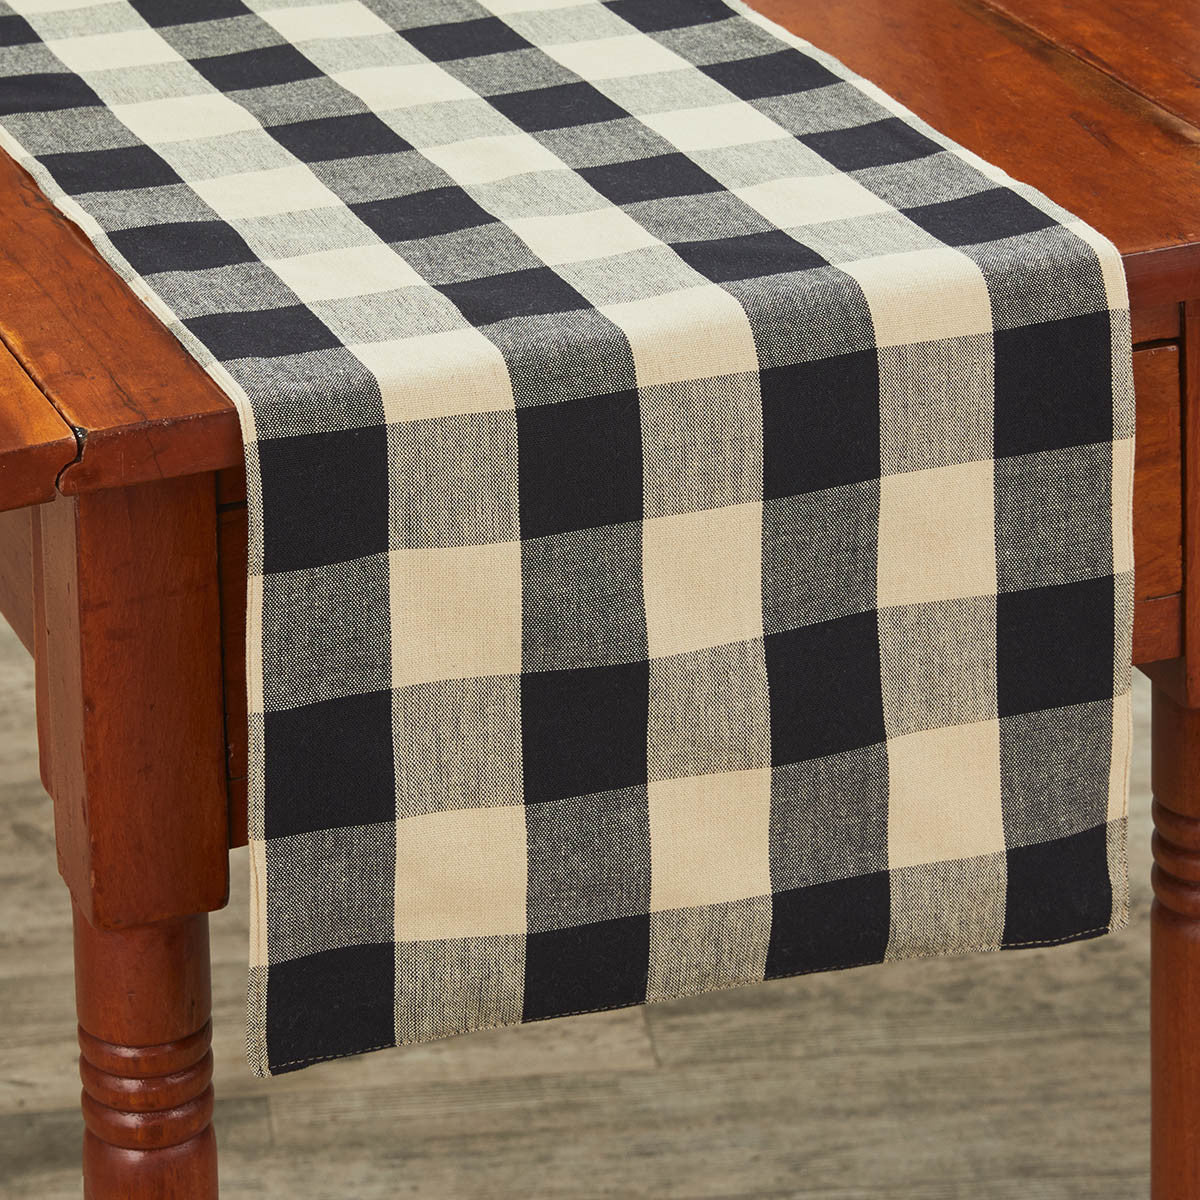 Wicklow Check Backed Table Runner 54"L - Black Park Designs